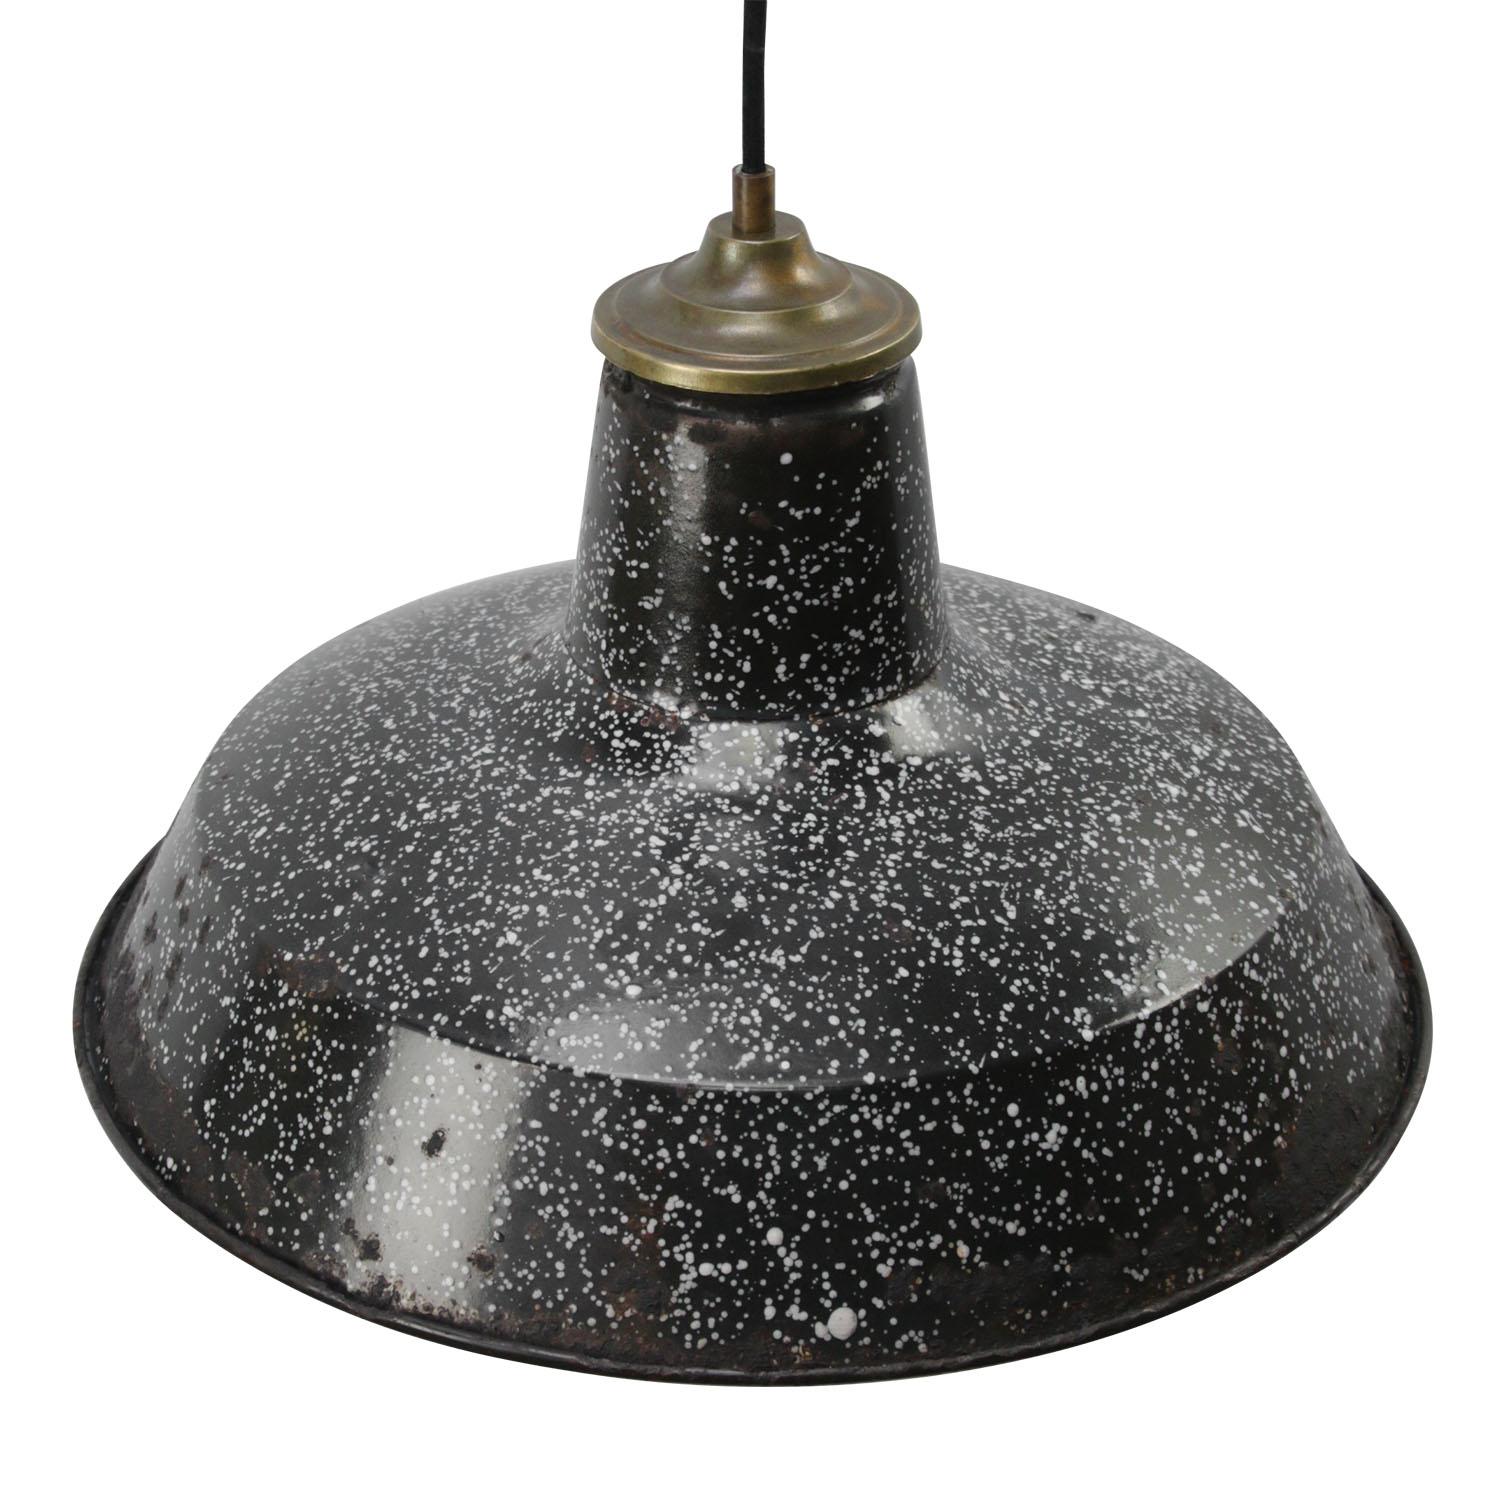 Belgian industrial hanging lamp
black and white speckled enamel white interior
brass top

Weight: 1.90 kg / 4.2 lb

Priced per individual item. All lamps have been made suitable by international standards for incandescent light bulbs,